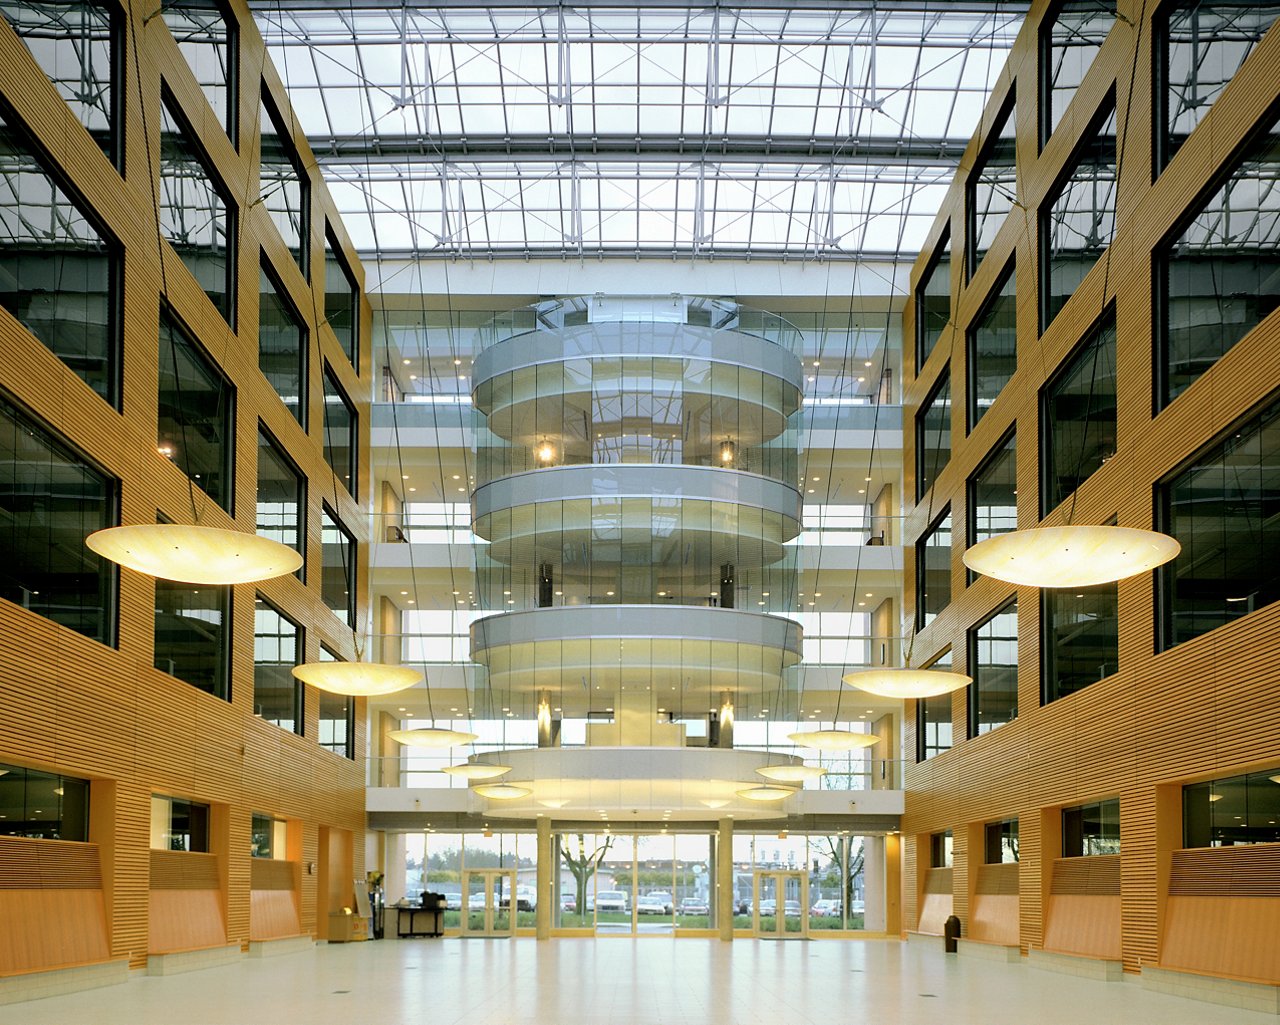 Interior View of the Building.